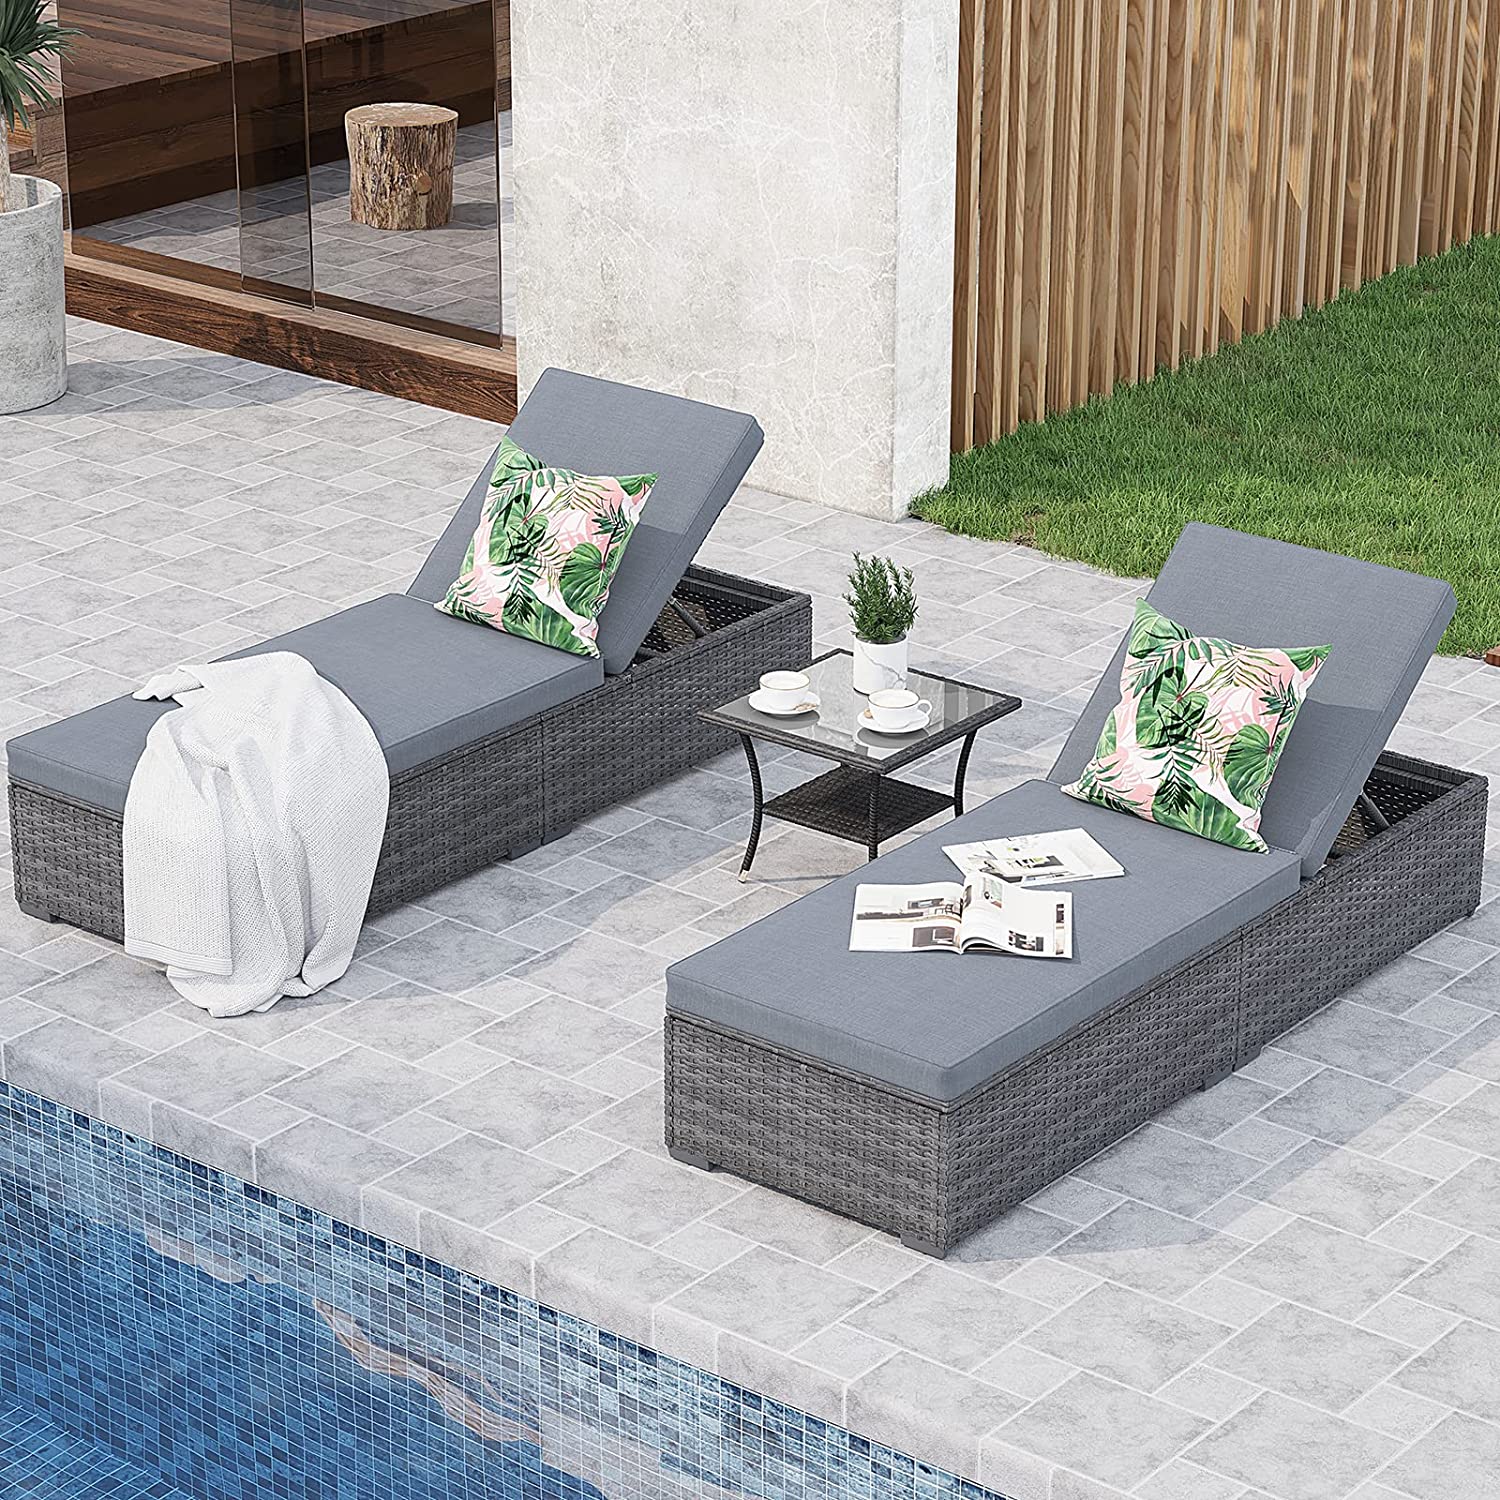 JOIVI Outdoor Chaise Lounge Chair, 3 Piece Patio Reclining Sun Lounger with Coffee Table, All Weather PE Rattan Adjustable Lounge Chair, Patio Pool Lounge Chairs with Removable Cushion, Grey - image 1 of 7